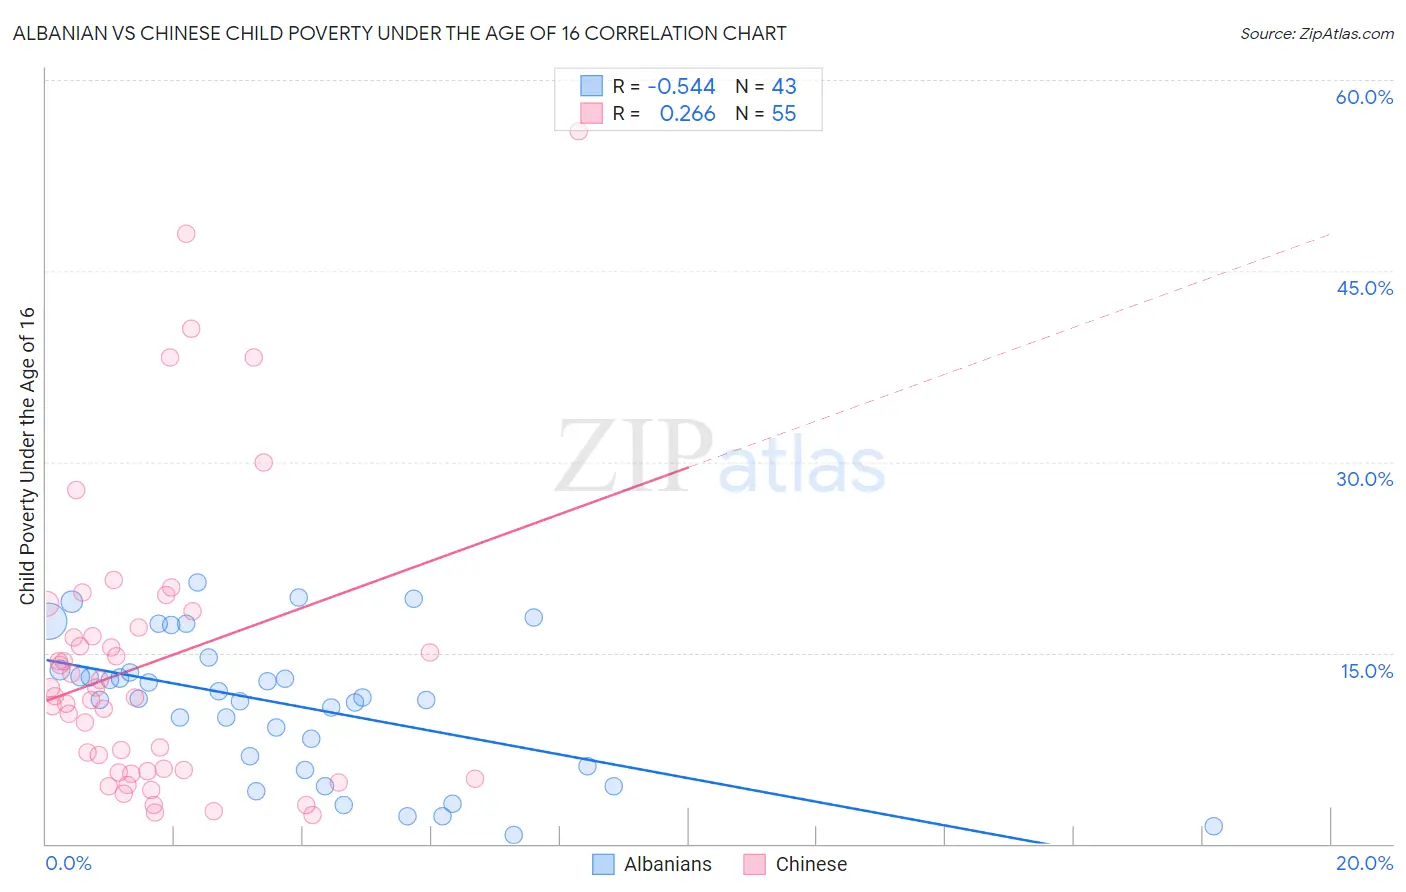 Albanian vs Chinese Child Poverty Under the Age of 16